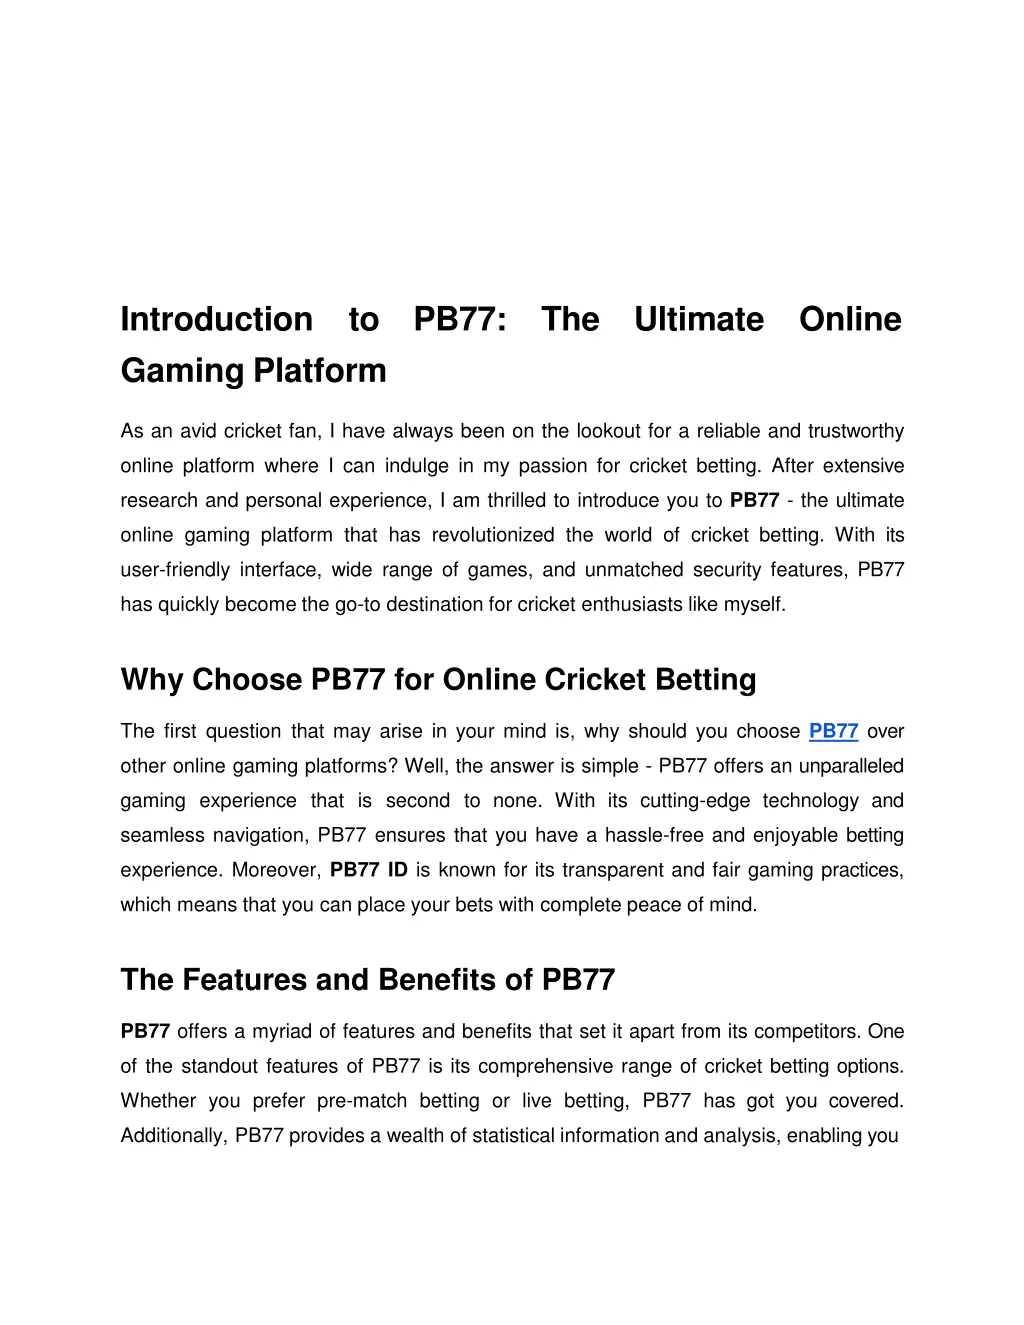 introduction to pb77 the ultimate online gaming